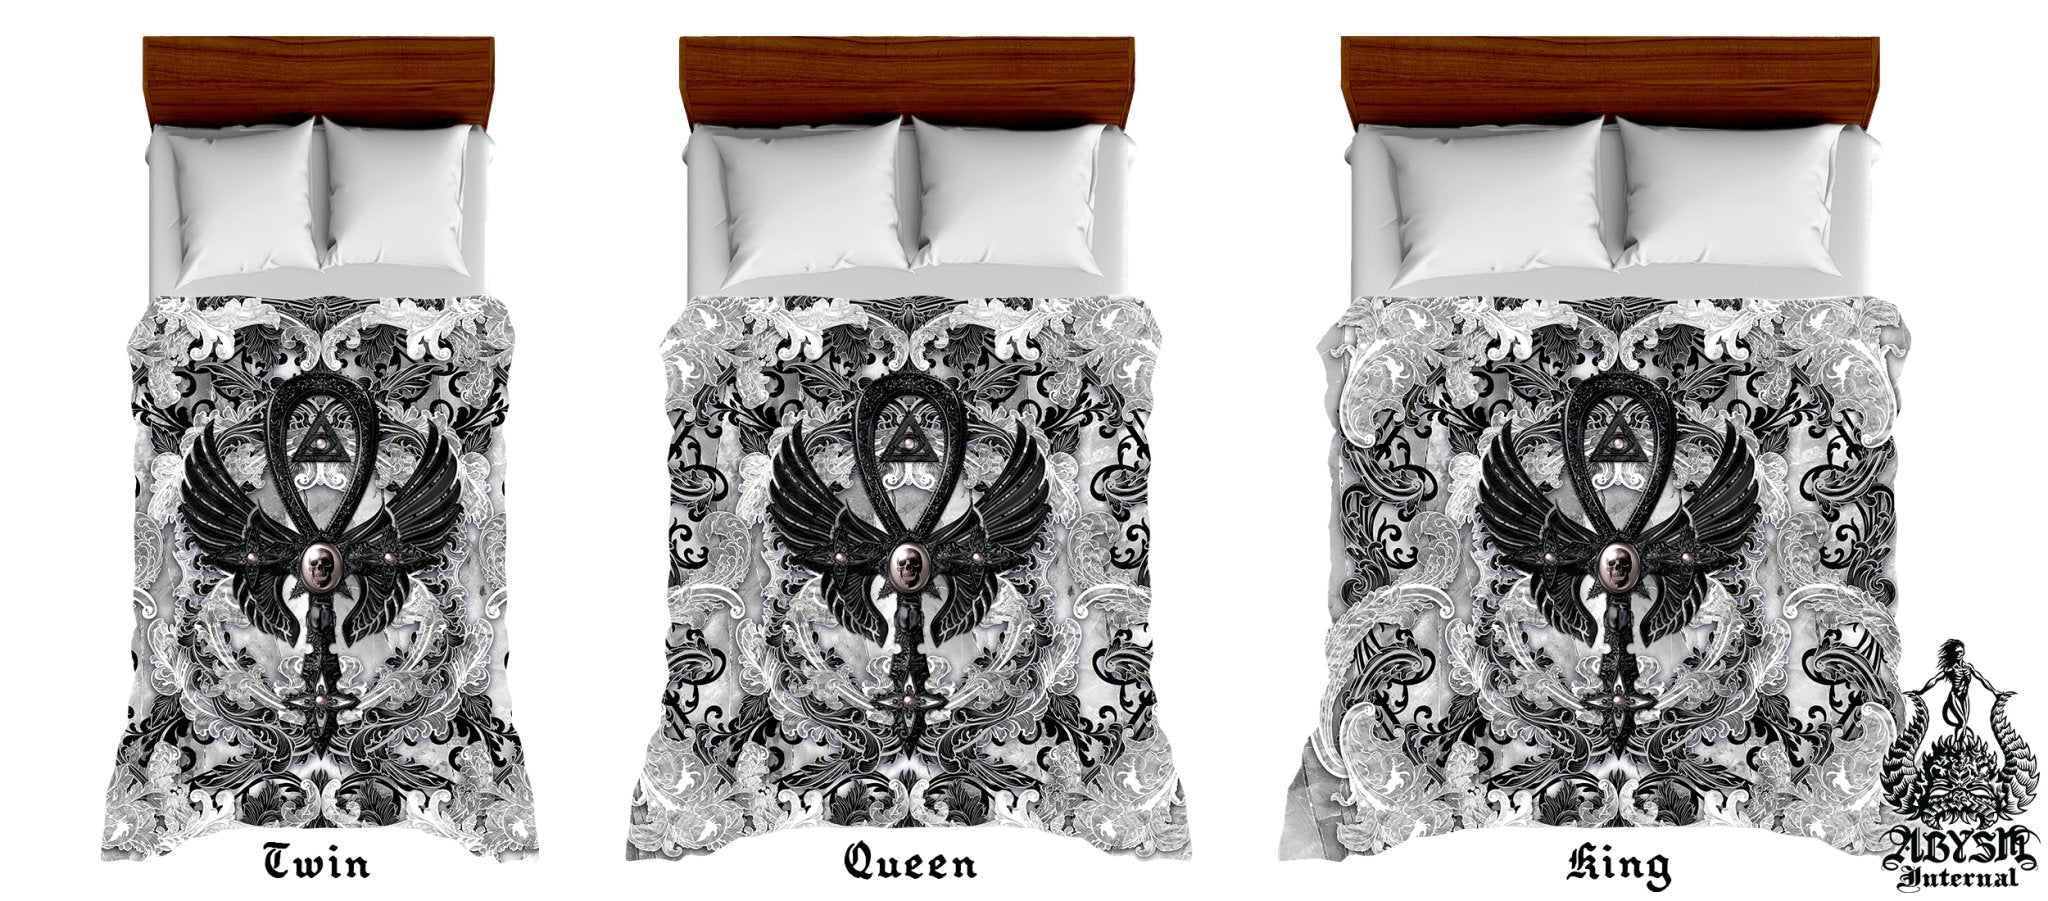 Black & White Goth Comforter or Duvet, Ankh Bed Cover, Gothic Bedroom Decor, King, Queen & Twin Bedding Set - Abysm Internal